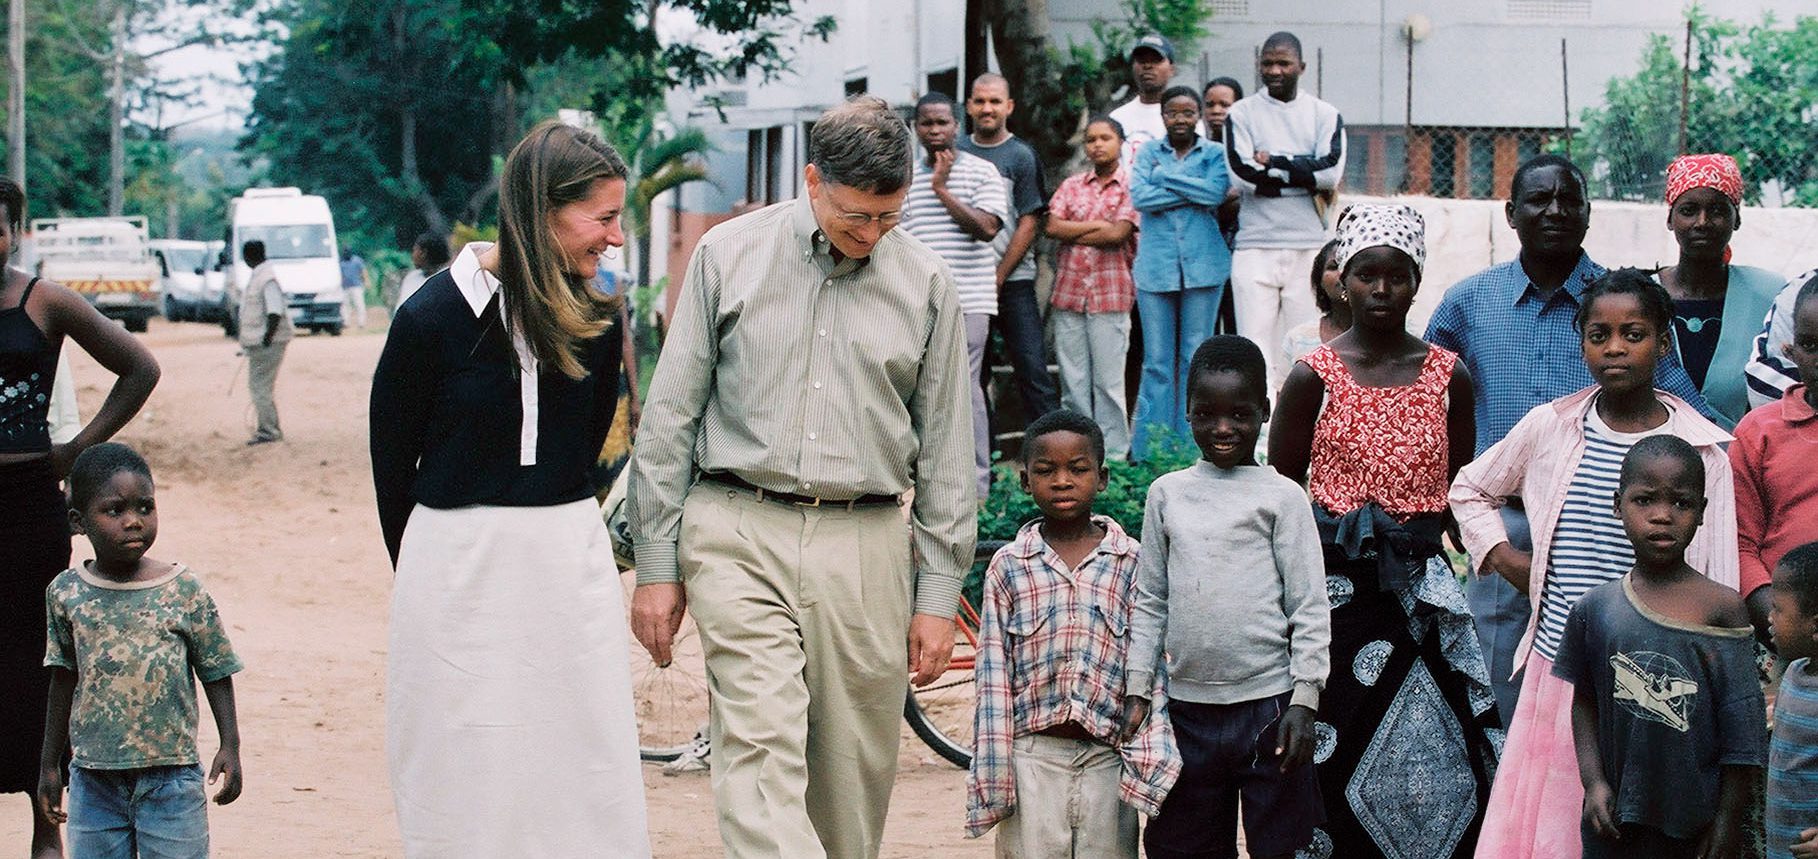 bill and melinda gates walk with children in third world country